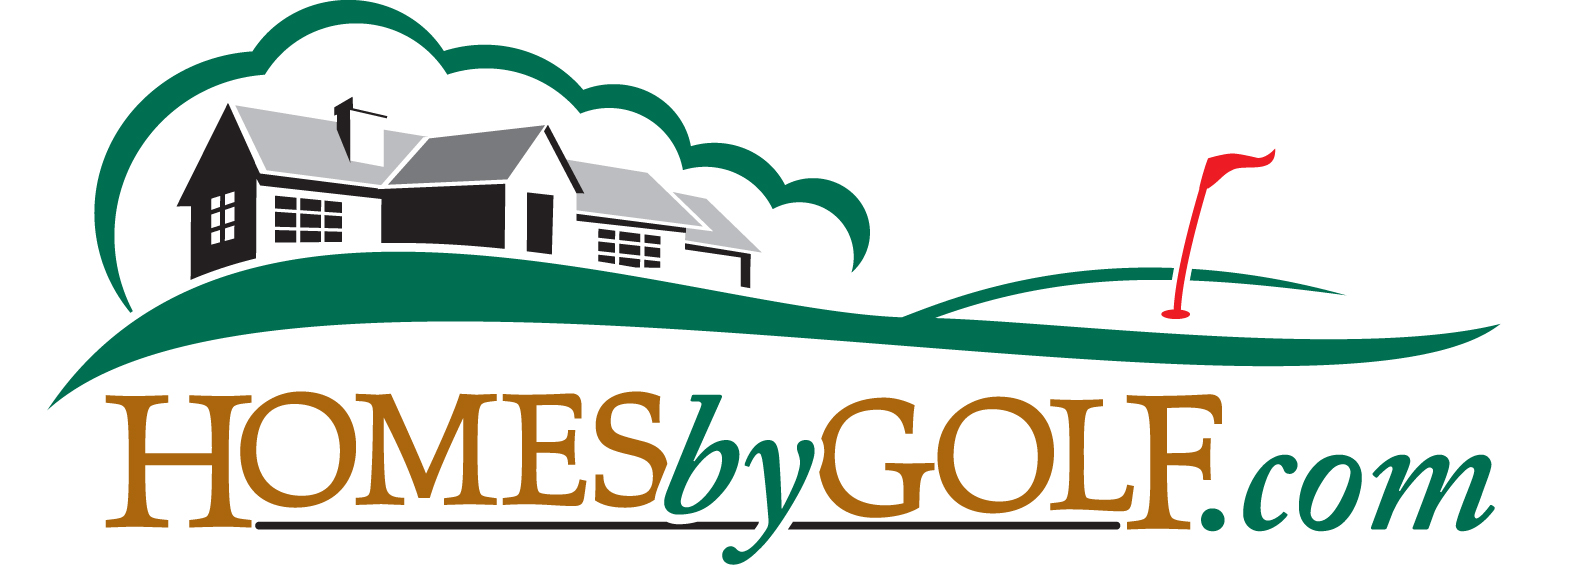 Homes by Golf Real Estate Company Logo Design